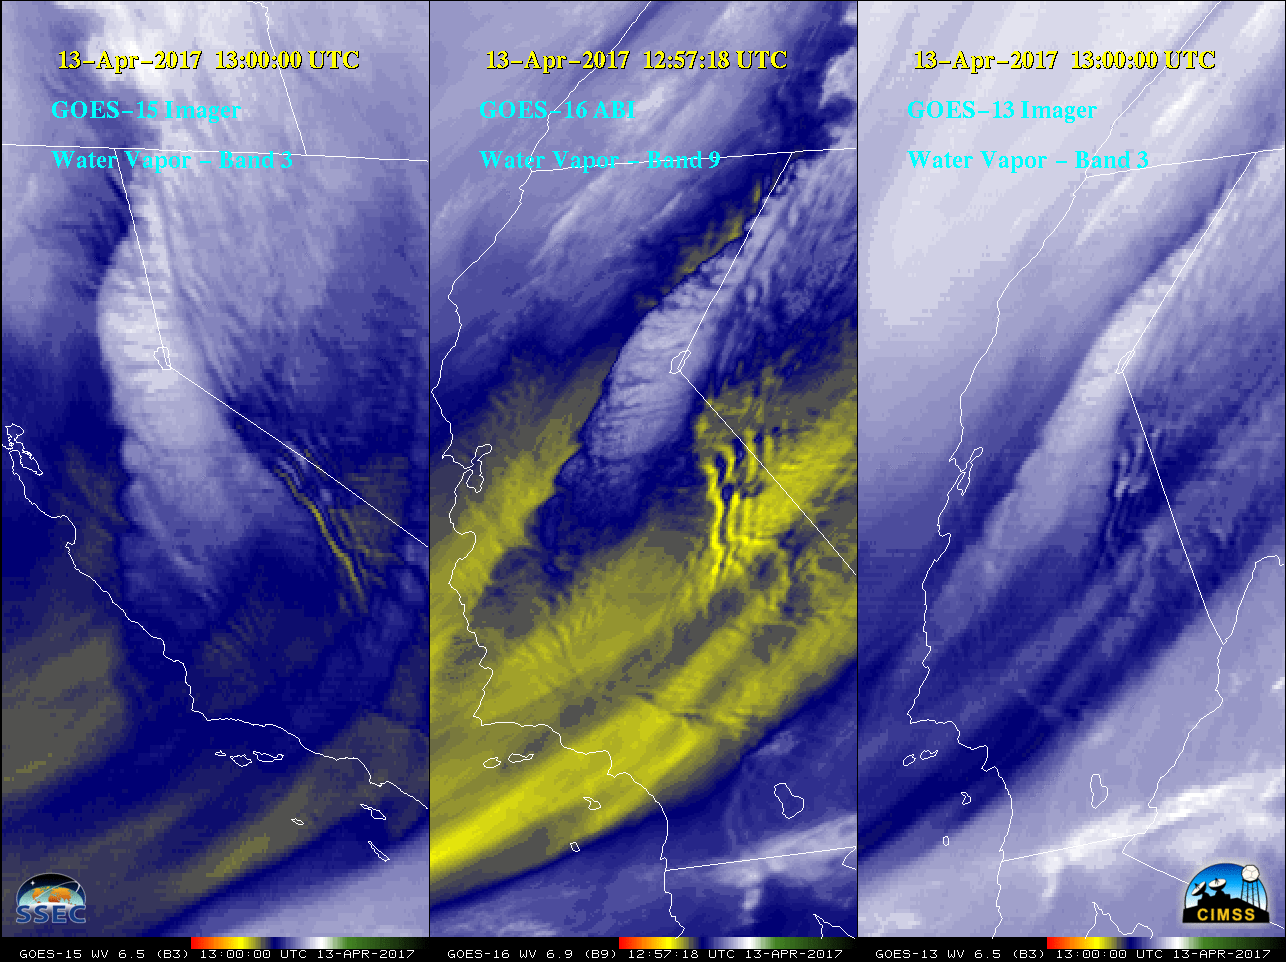 OES-15 (6.5 µm, left), GOES-16 (6.9 µm, center) and GOES-13 (6.5 µm, right) Water Vapor images [click to play animation]